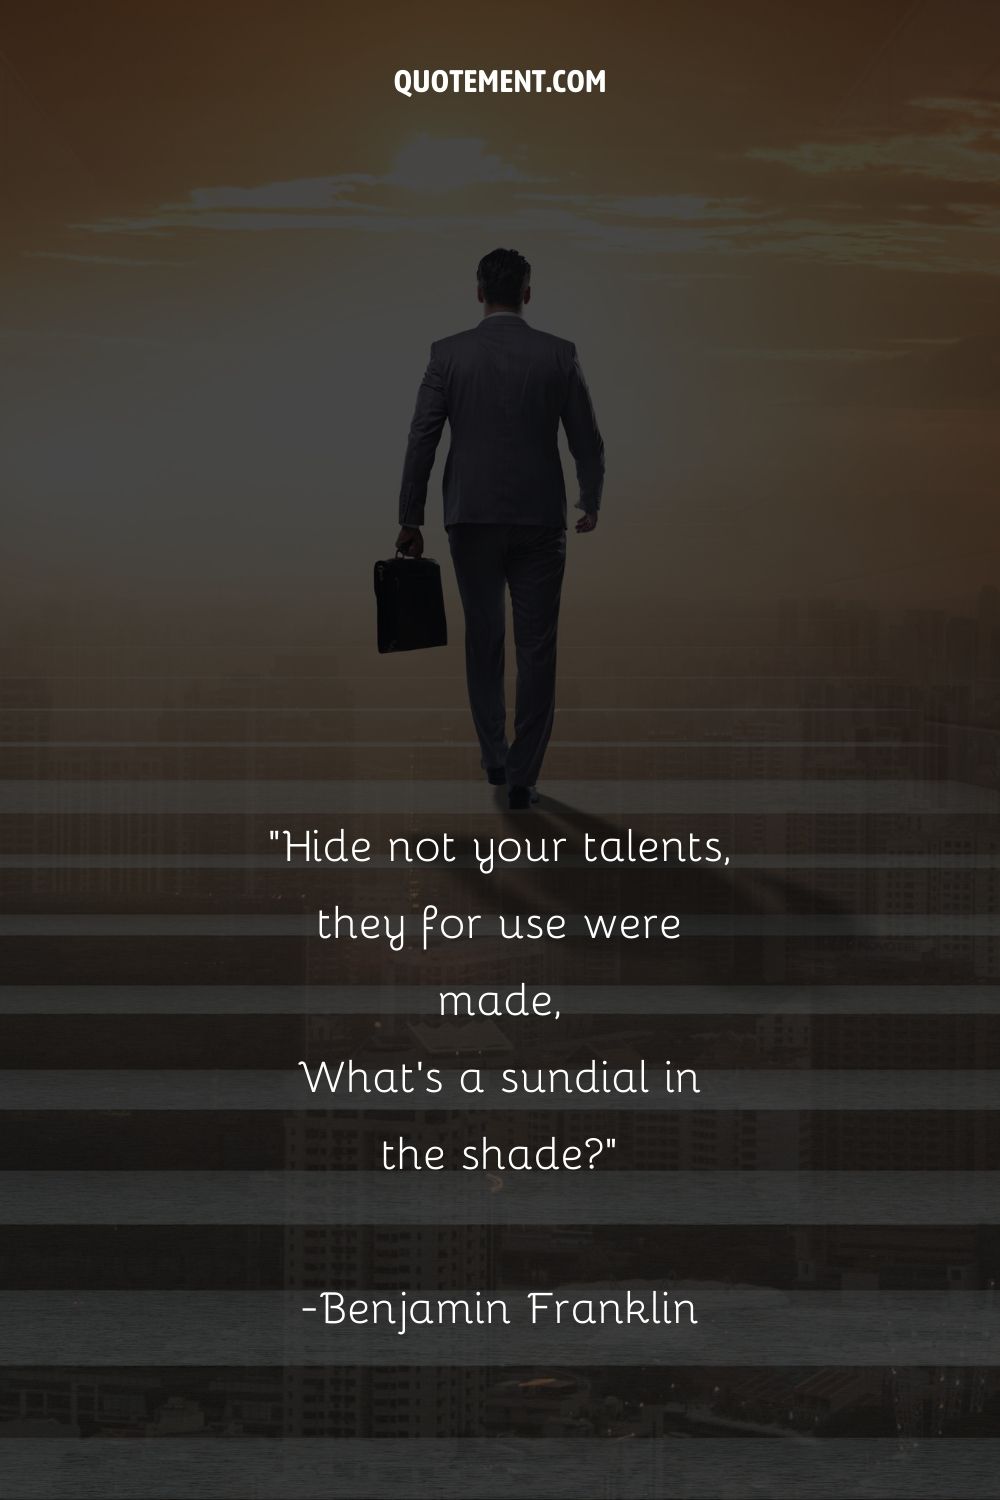 Hide not your talents, they for use were made